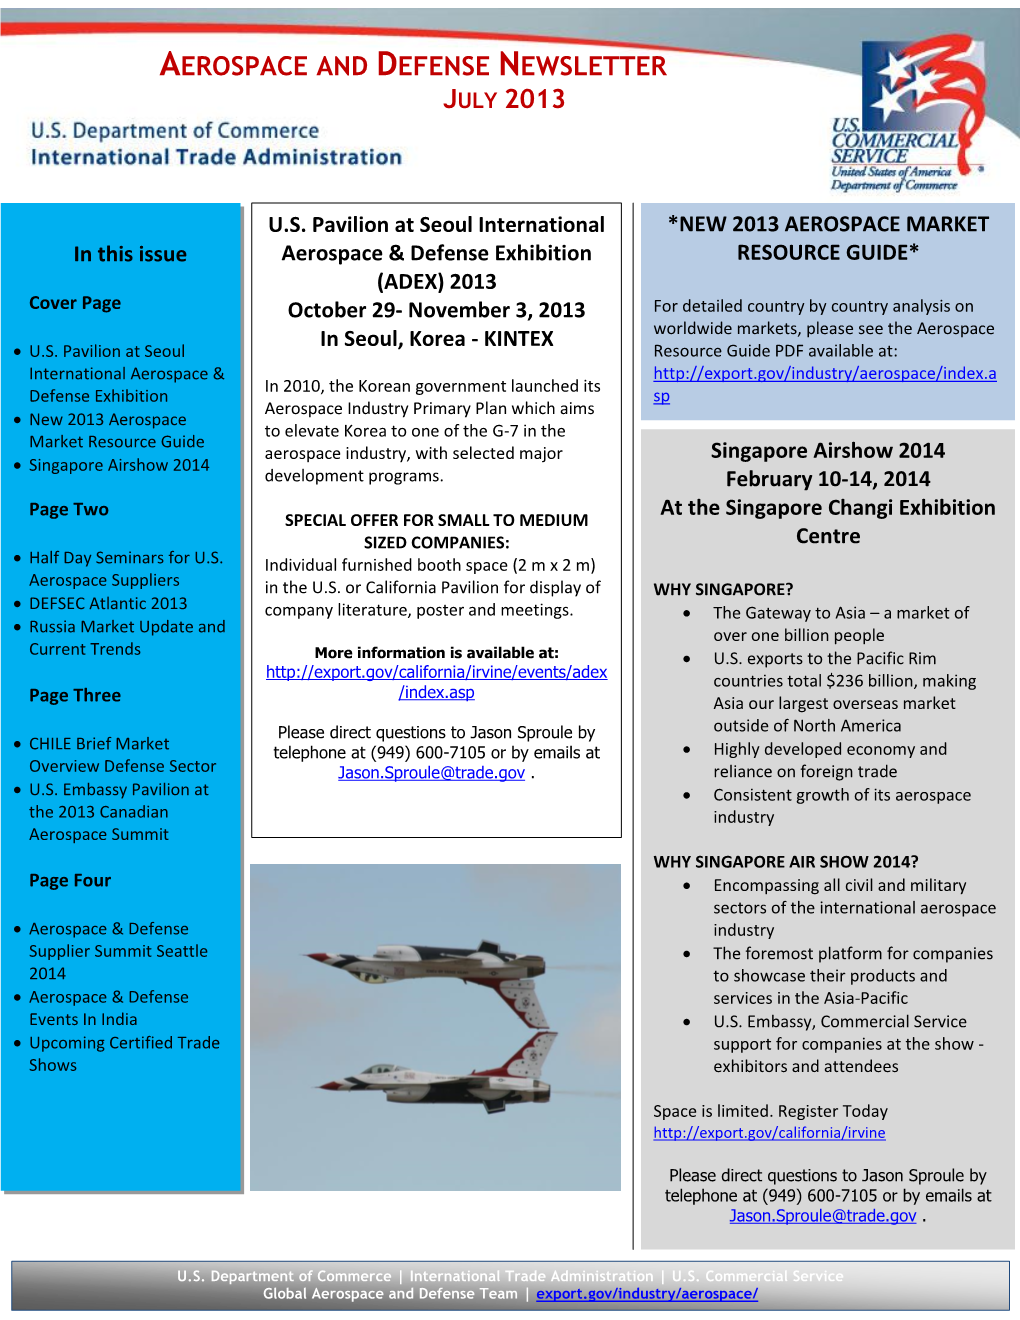 Aerospace and Defense Newsletter July 2013